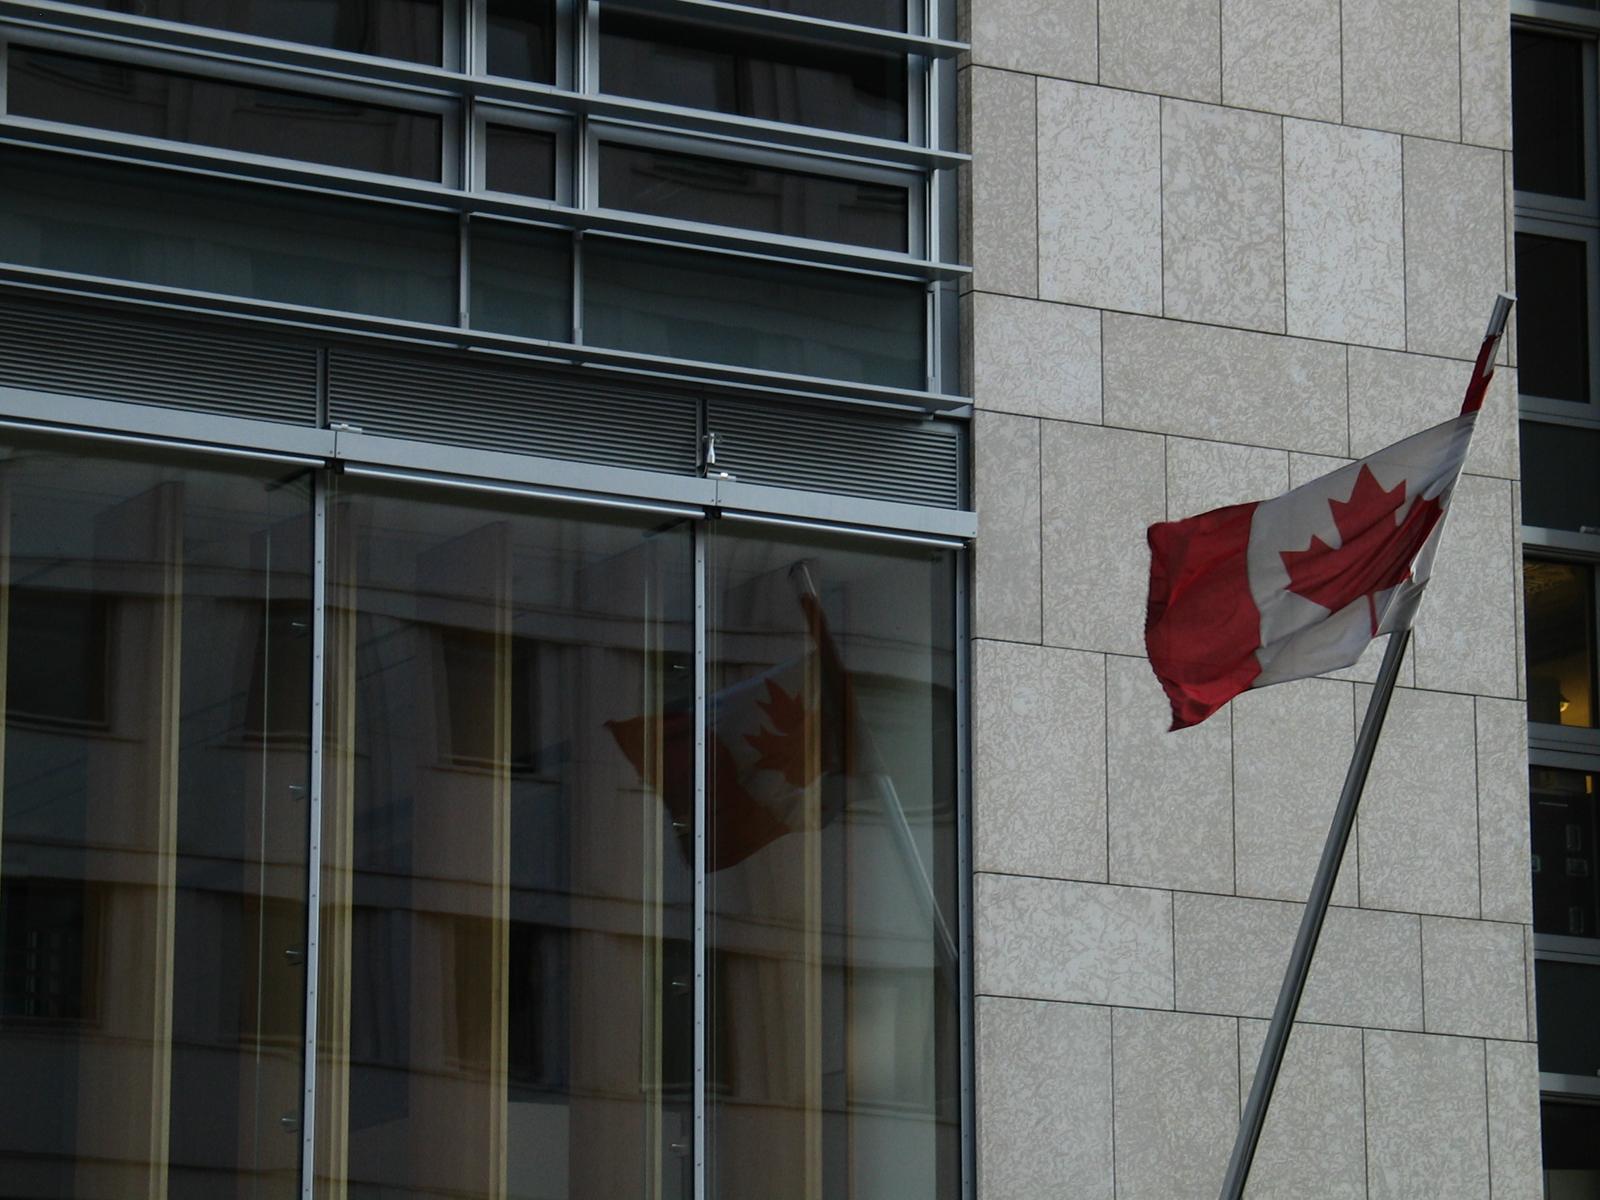 The Canadian Embassy's Flag